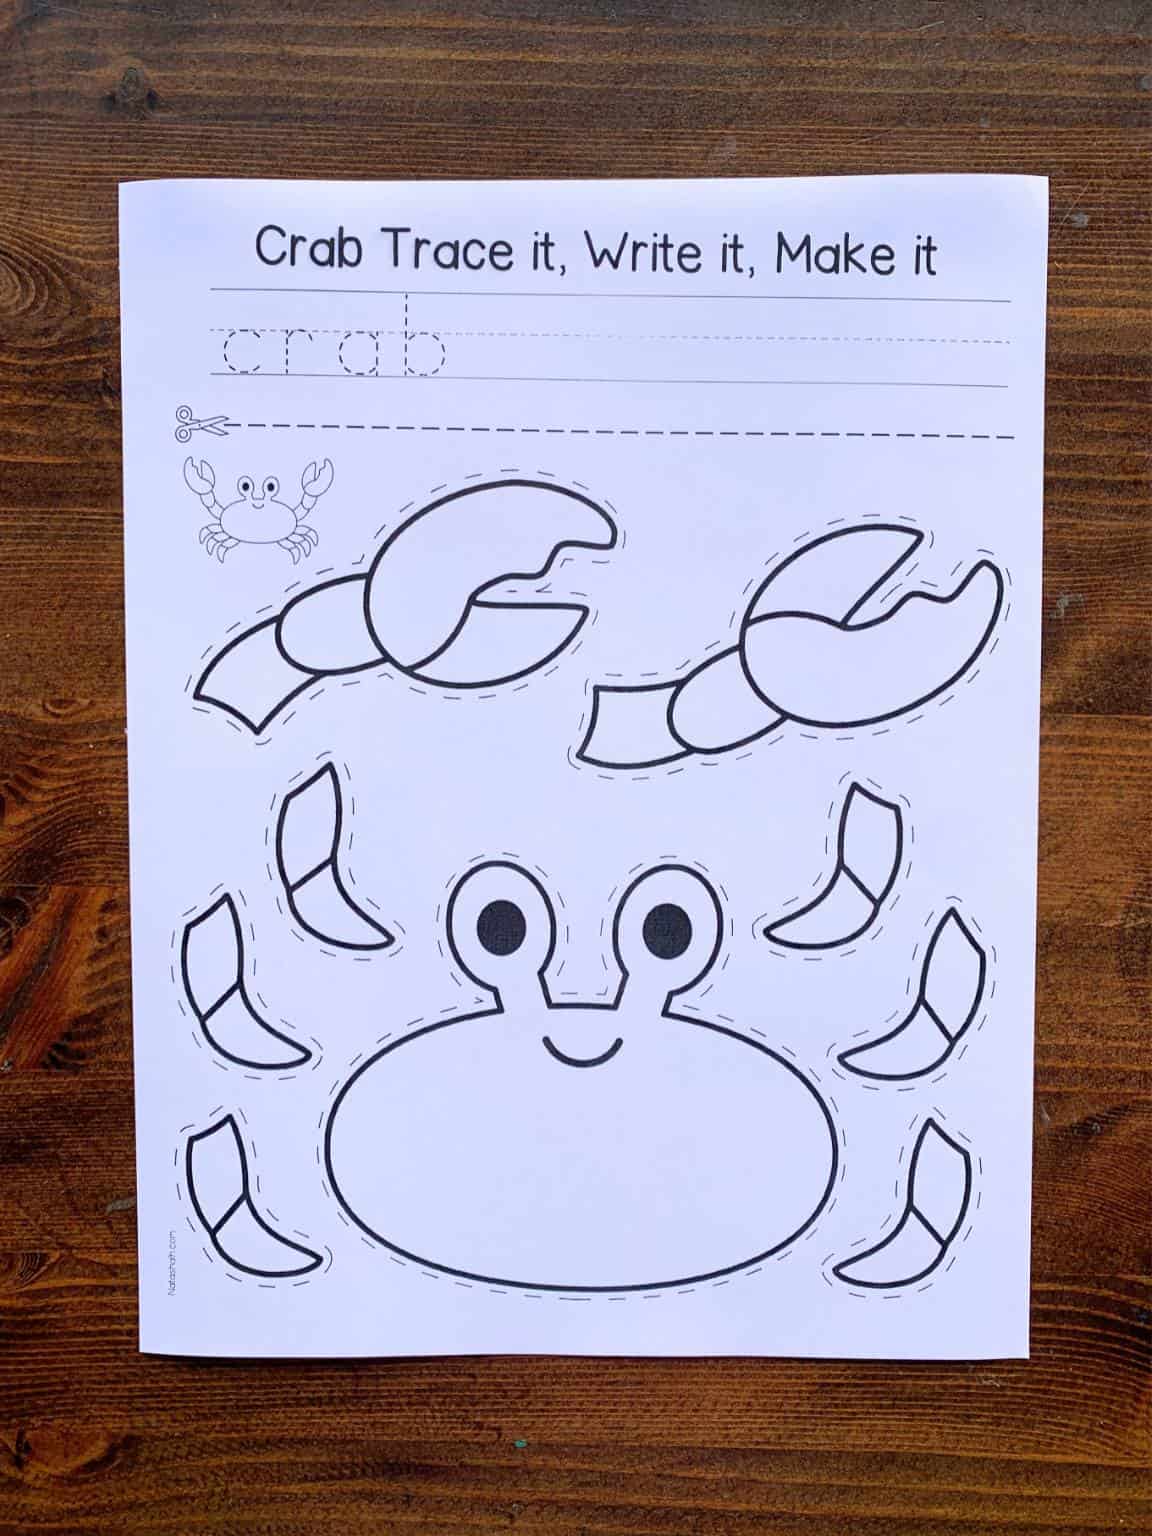 A photograph of a printed black and white crab craft template 